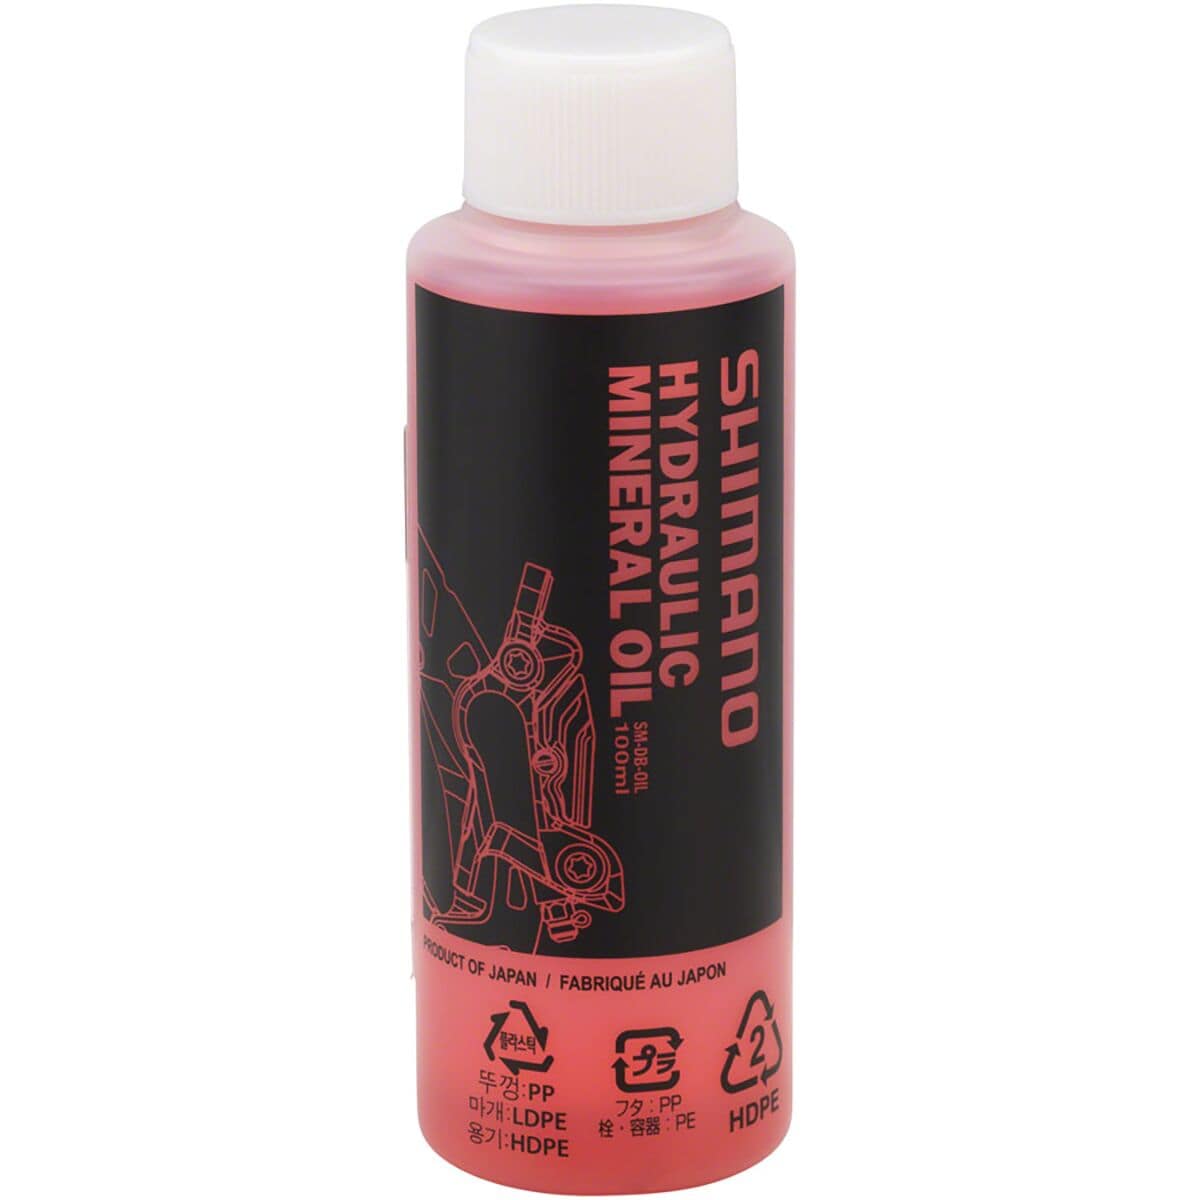 Shimano Hydraulic Mineral Oil (100ml) One Color, 100ml